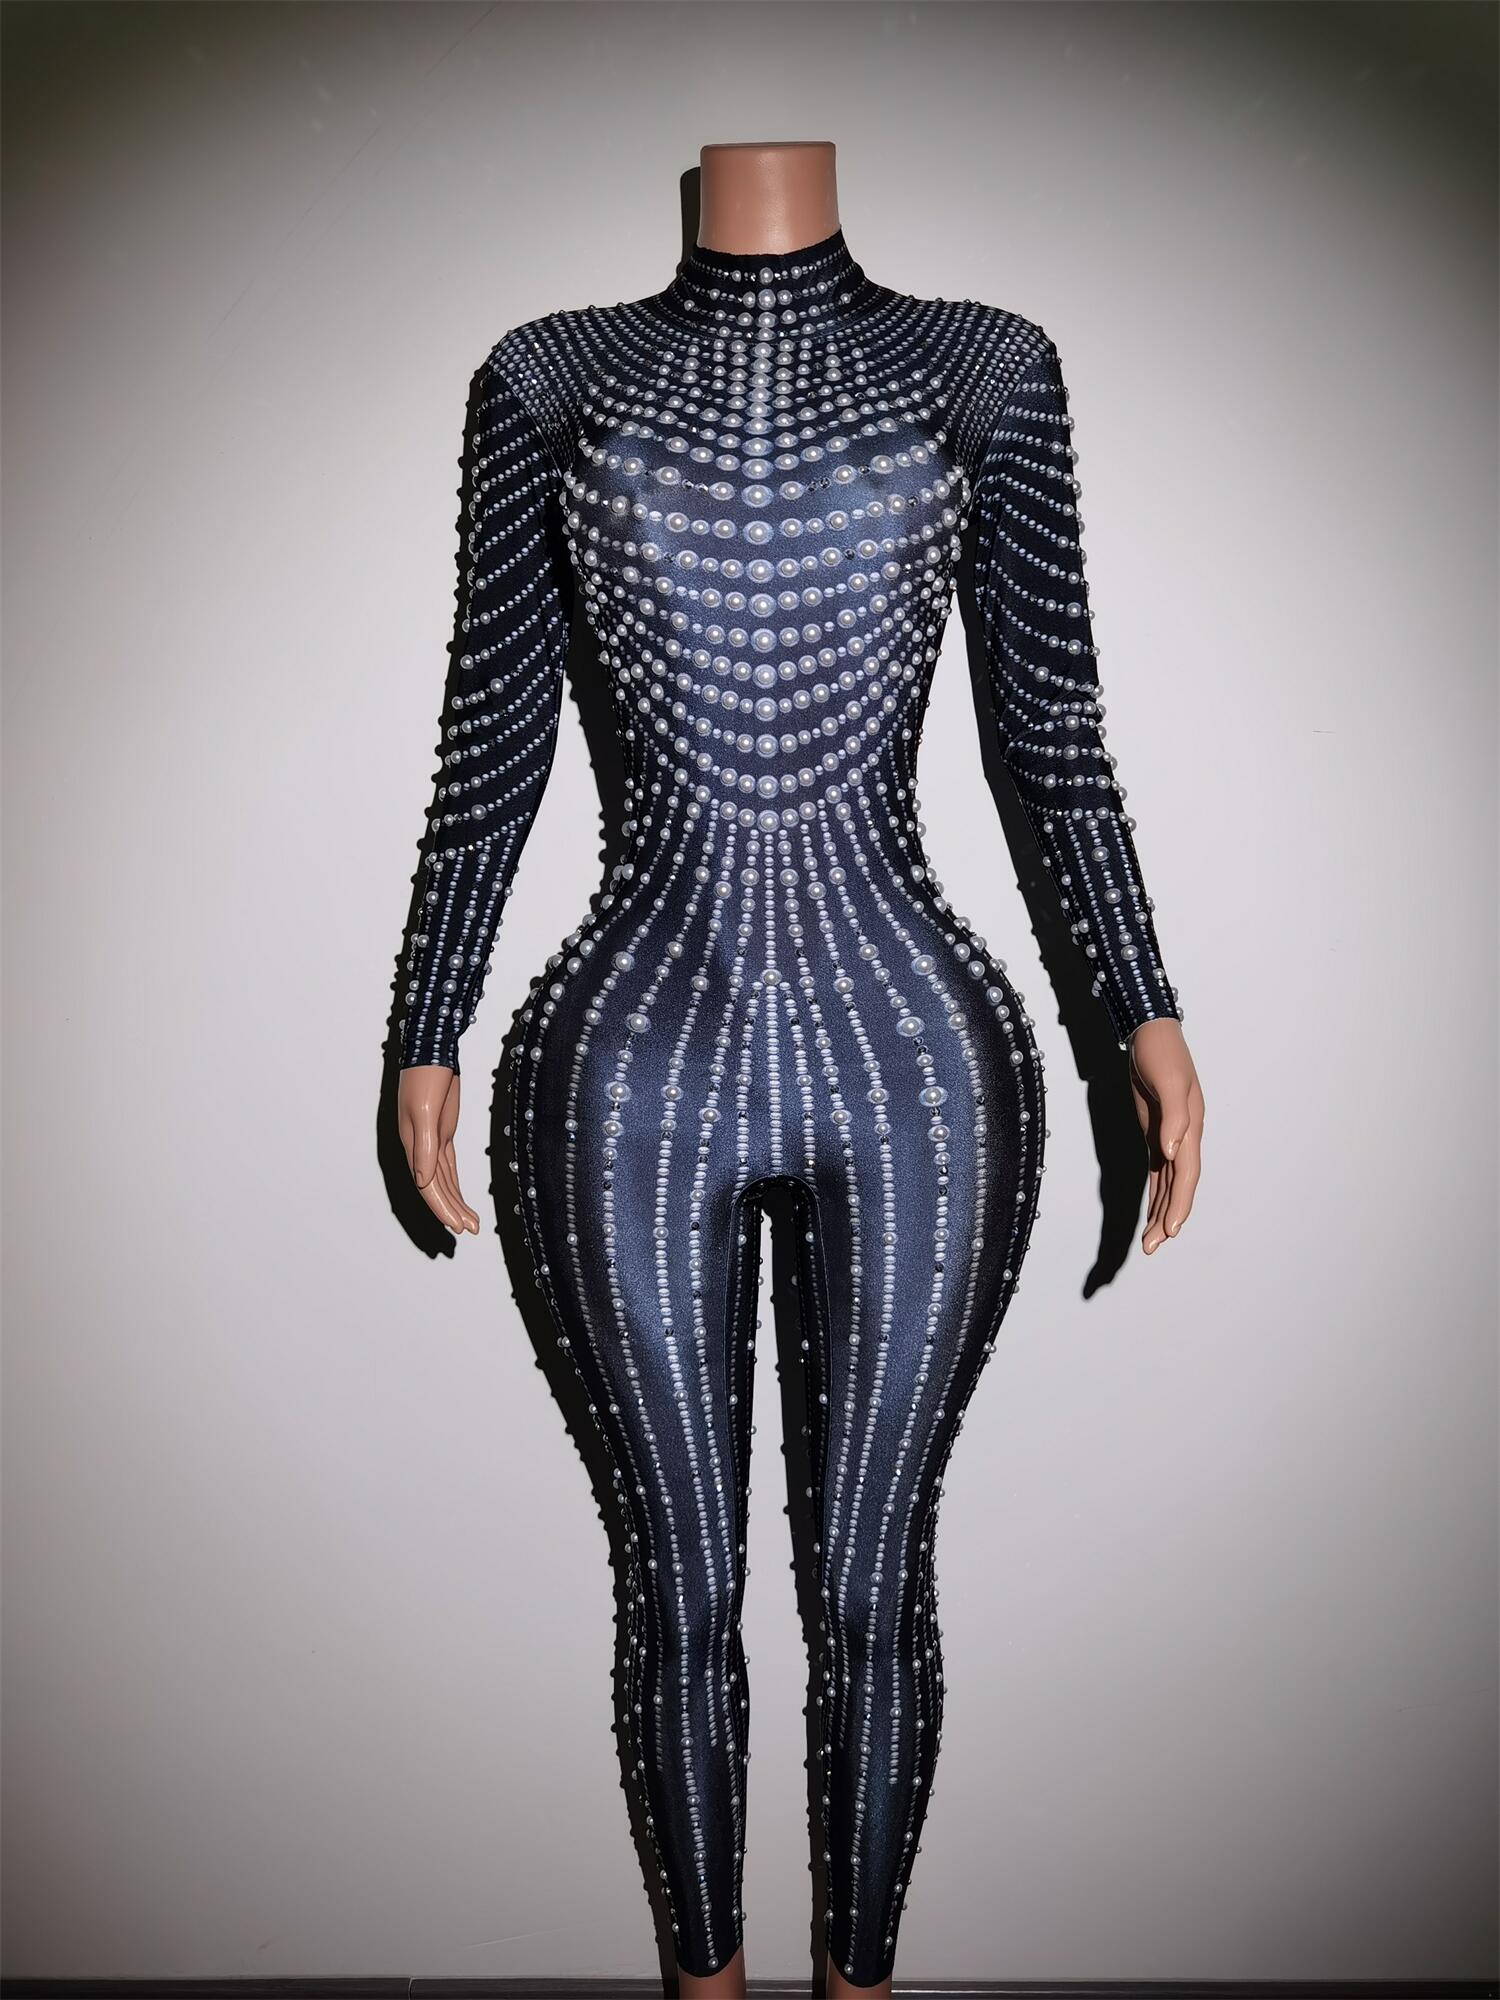 Bright Pearls Crystals Jumpsuits Sexy Rhinestones Perspective Bodysuit Stage Dance Wear Celebrate Shining Costume